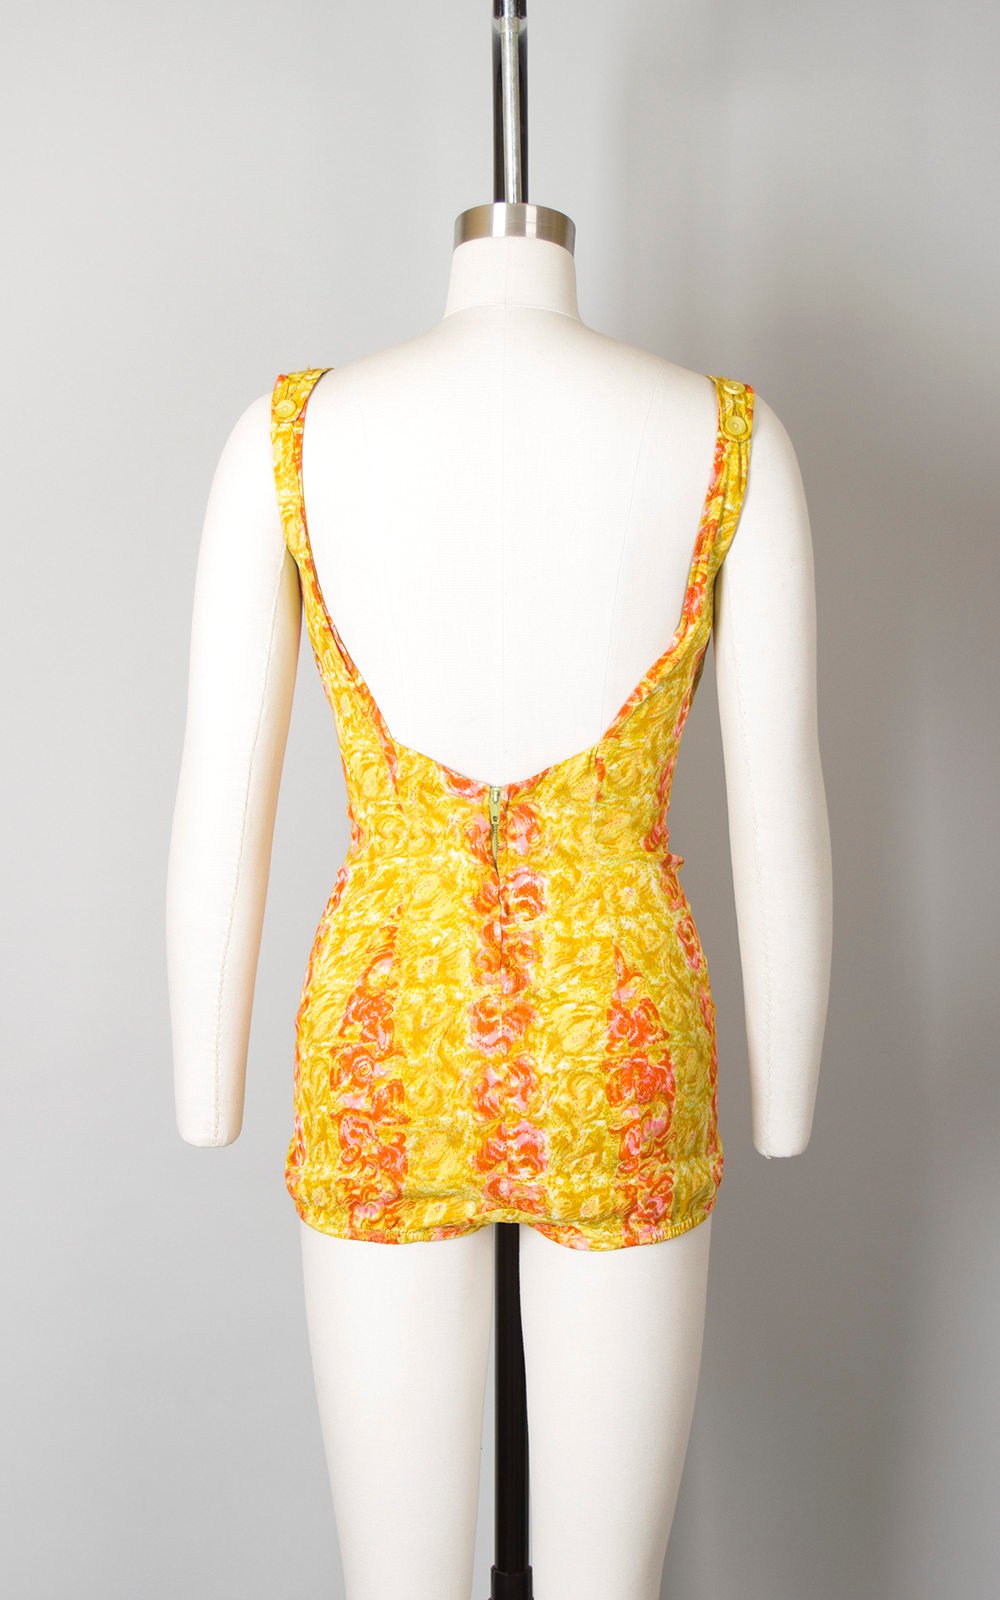 Vintage 1960s Swimsuit | 60s ROSE MARIE REID Rose Floral Print Striped Yellow Pink Open Back One Piece Pin Up Bathing Suit (medium/large)